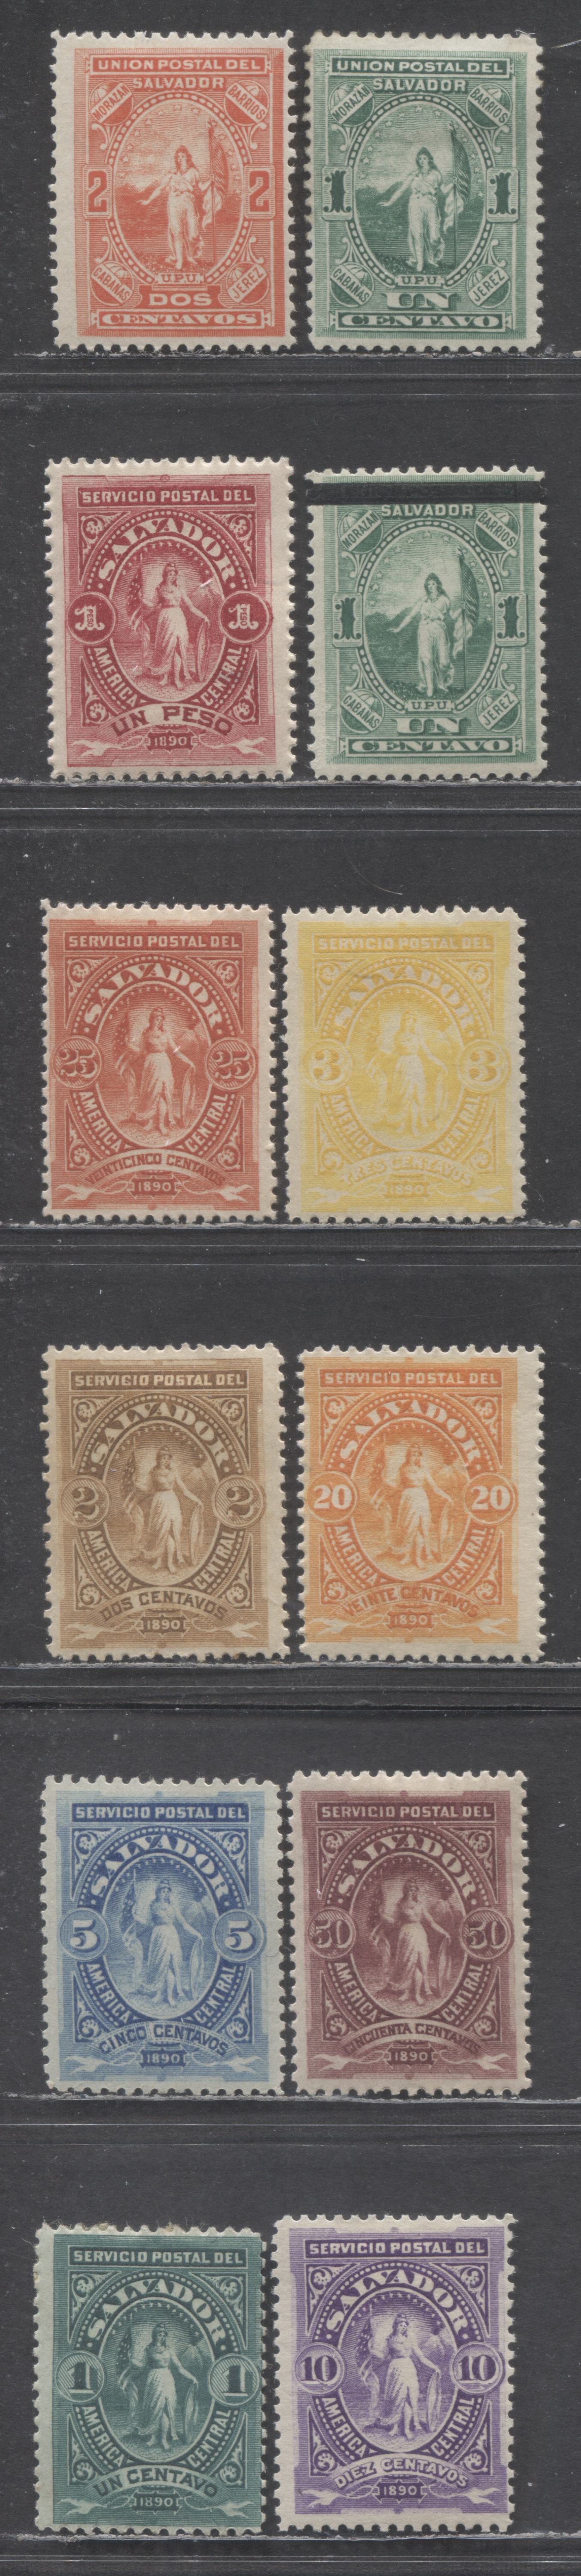 Lot 99 El Salvador SC#21/46 1889-1890 Liberty Issue, 12 F/VFOG Singles, Click on Listing to See ALL Pictures,2022 Scott Classic Cat. $6.95